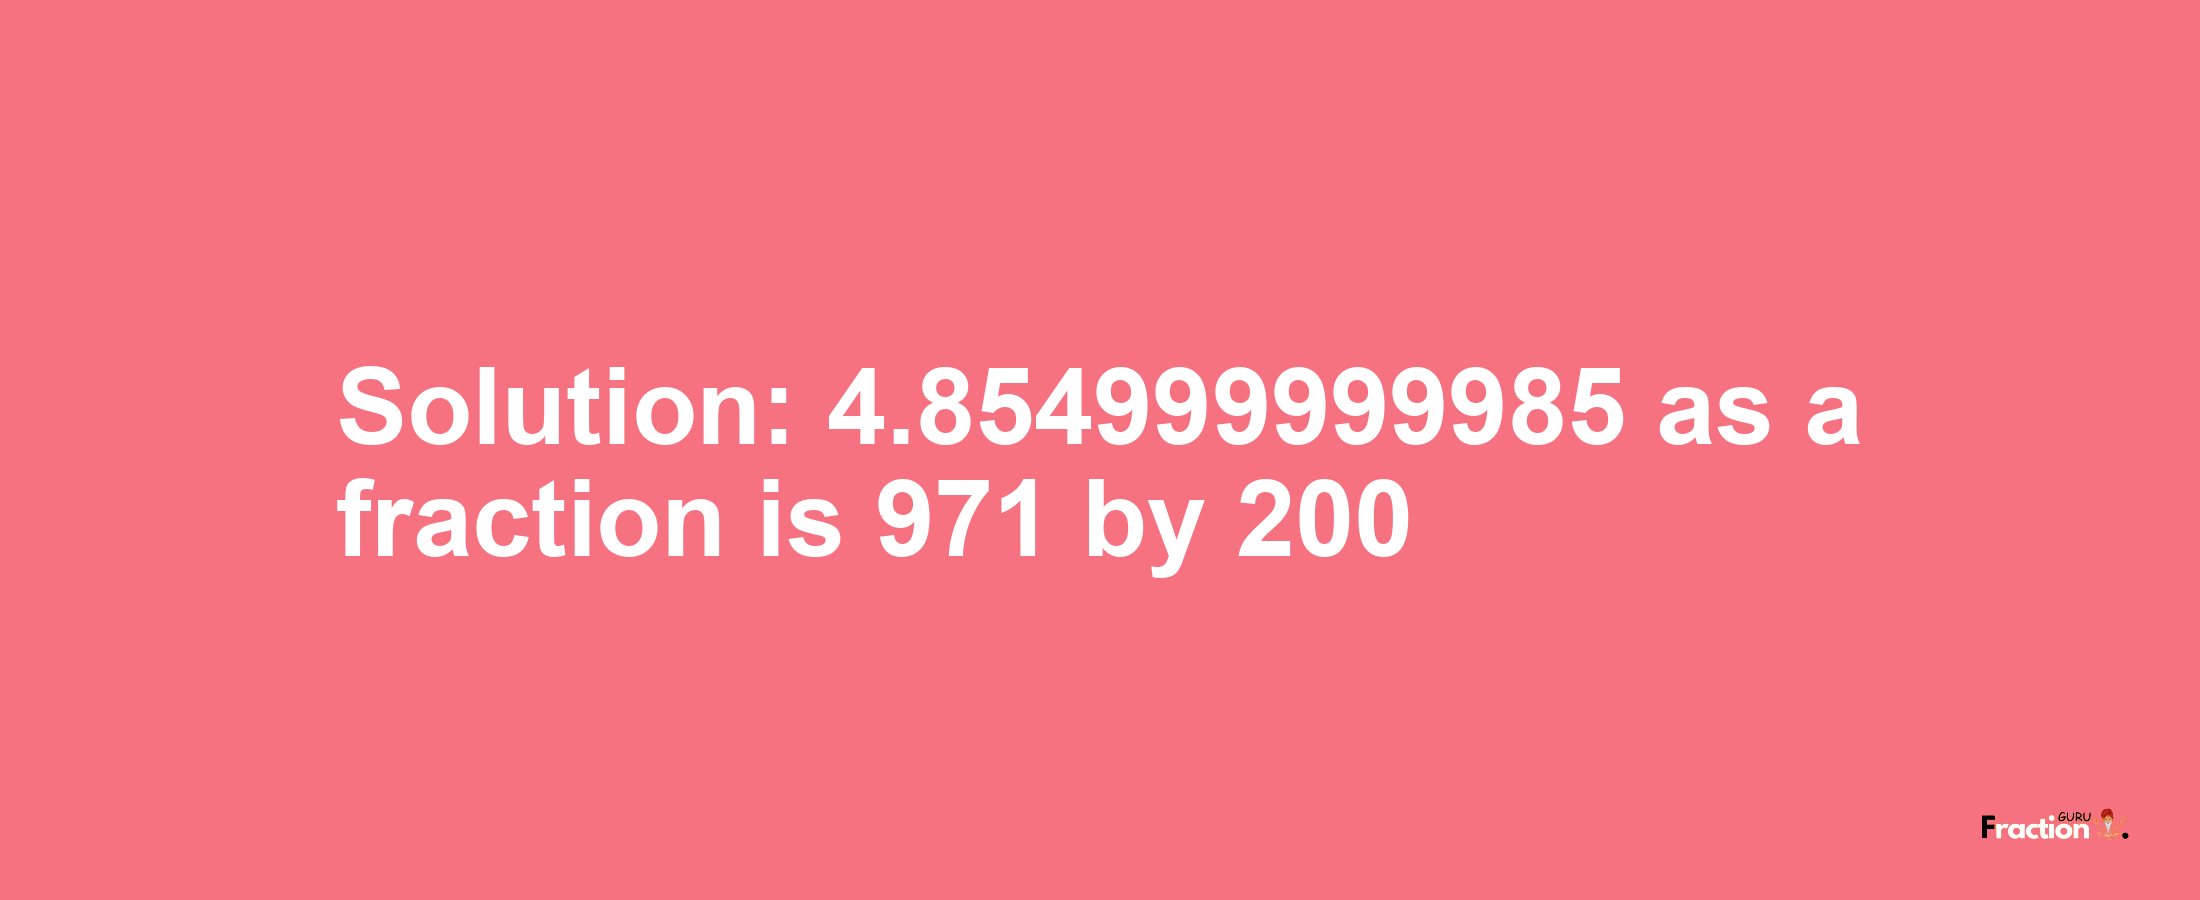 Solution:4.854999999985 as a fraction is 971/200